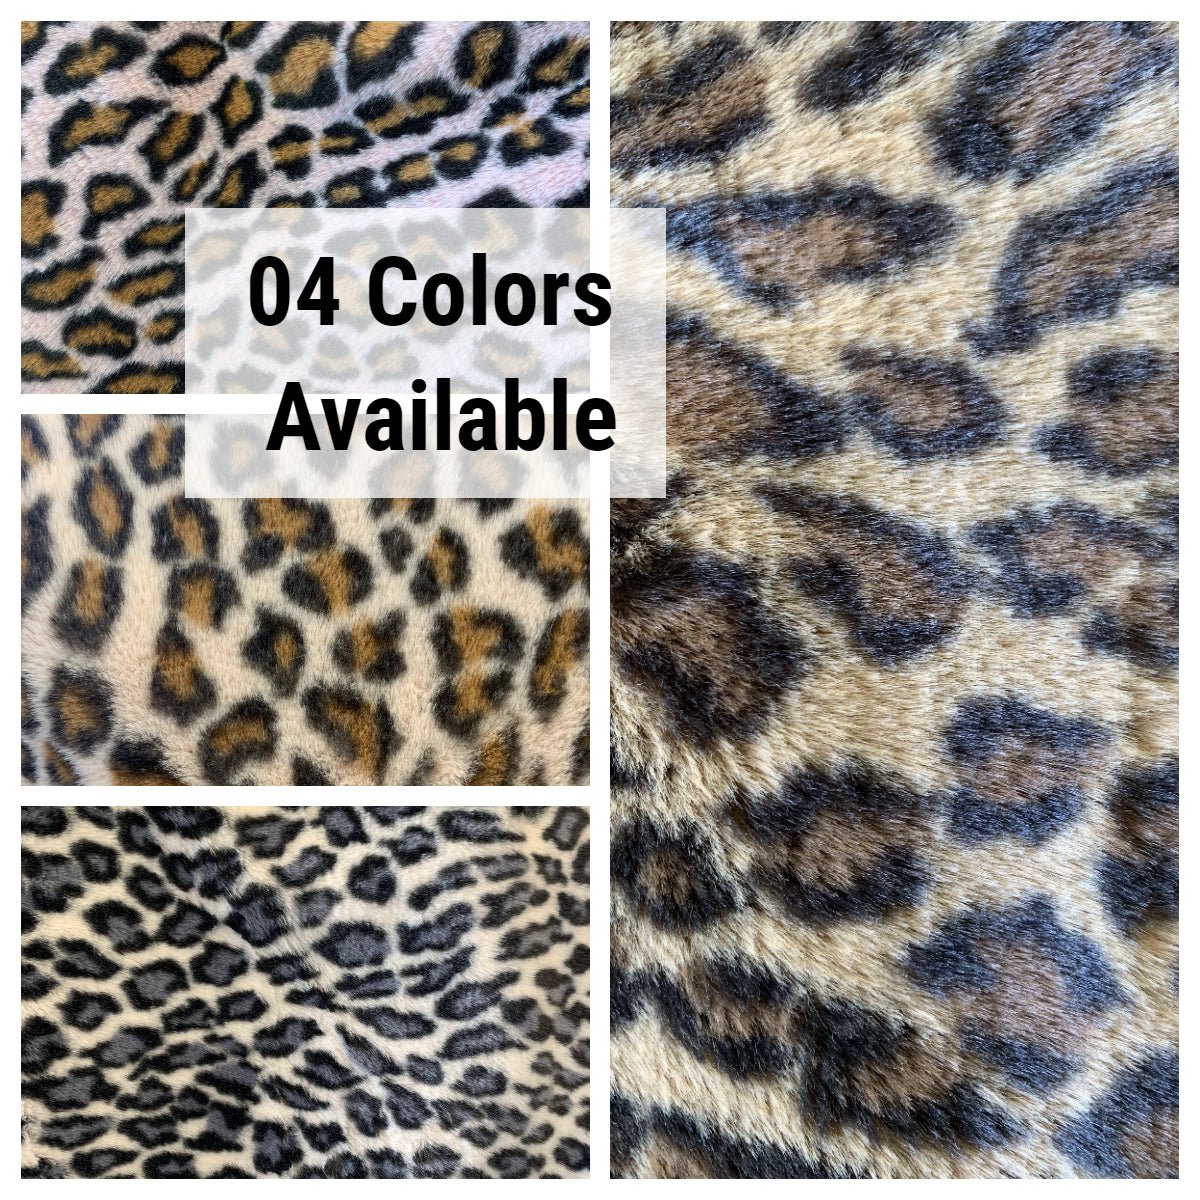 Leopard Fake Faux Fur Fabric By The Yard - Faux Fur Material Fashion FabricICEFABRICICE FABRICSBrownBy The Yard (60 inches Wide)Leopard Fake Faux Fur Fabric By The Yard - Faux Fur Material Fashion Fabric ICEFABRIC